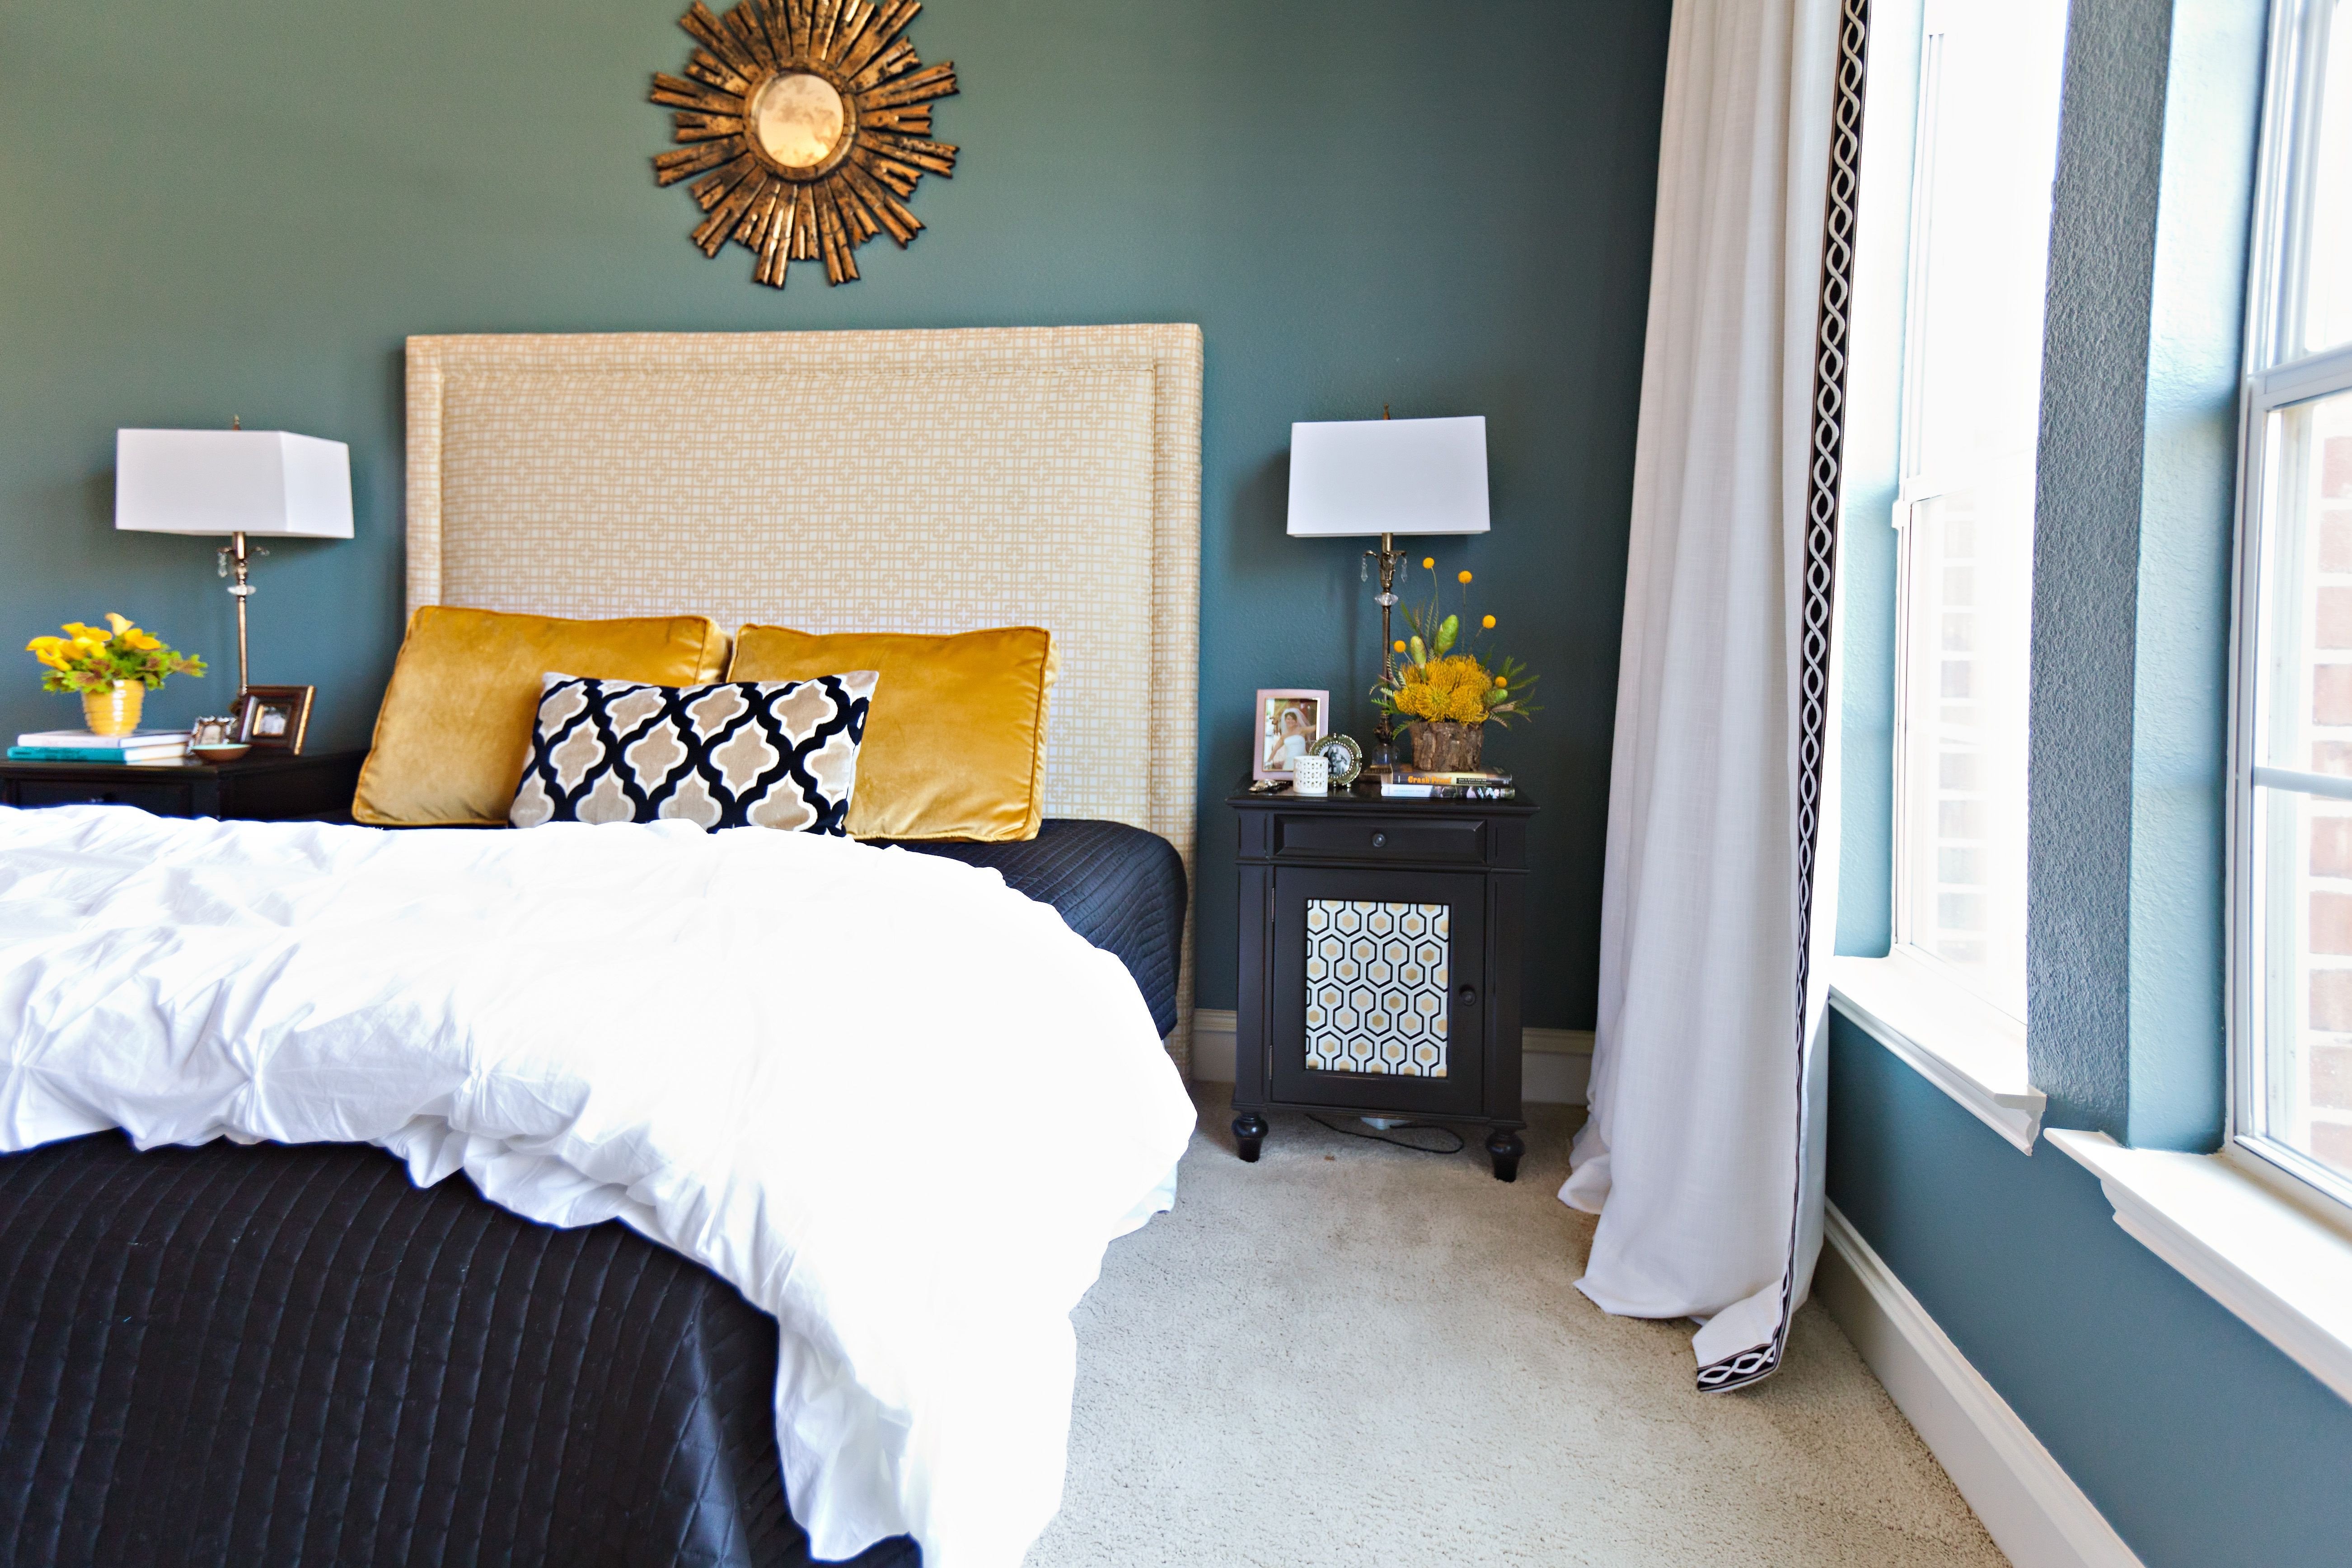 Tan and White Bedroom Lovely Turquoise Blue Yellow Tan with White Love these Colors